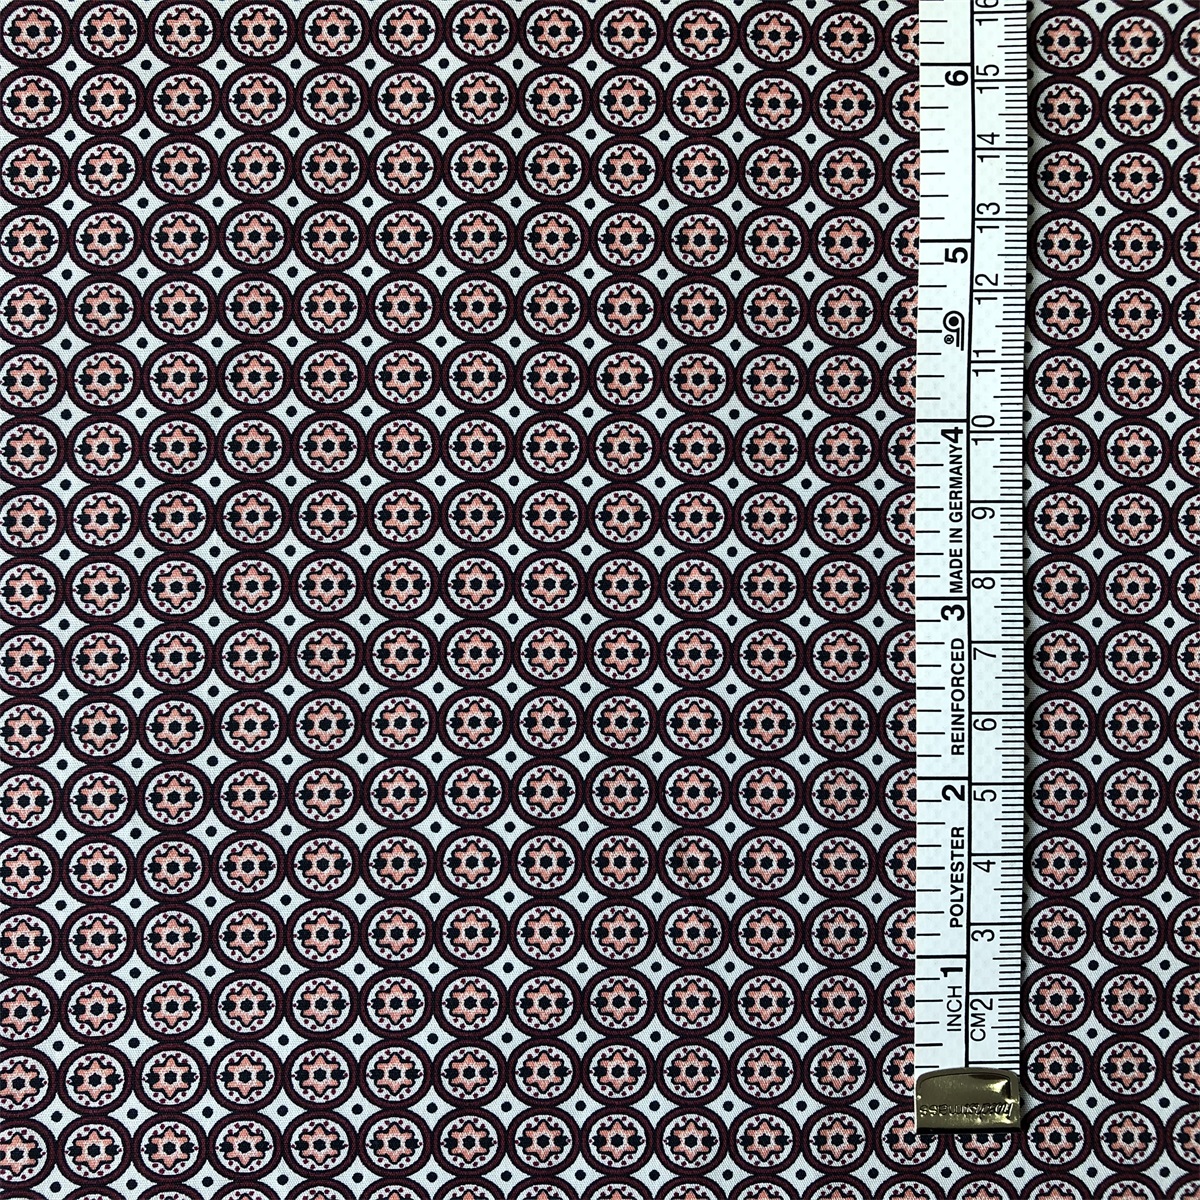 Sun-rising Textile Cotton Printed fabric high quality Eco-friendly 100%cotton poplin printed woven fabric for men's shirts